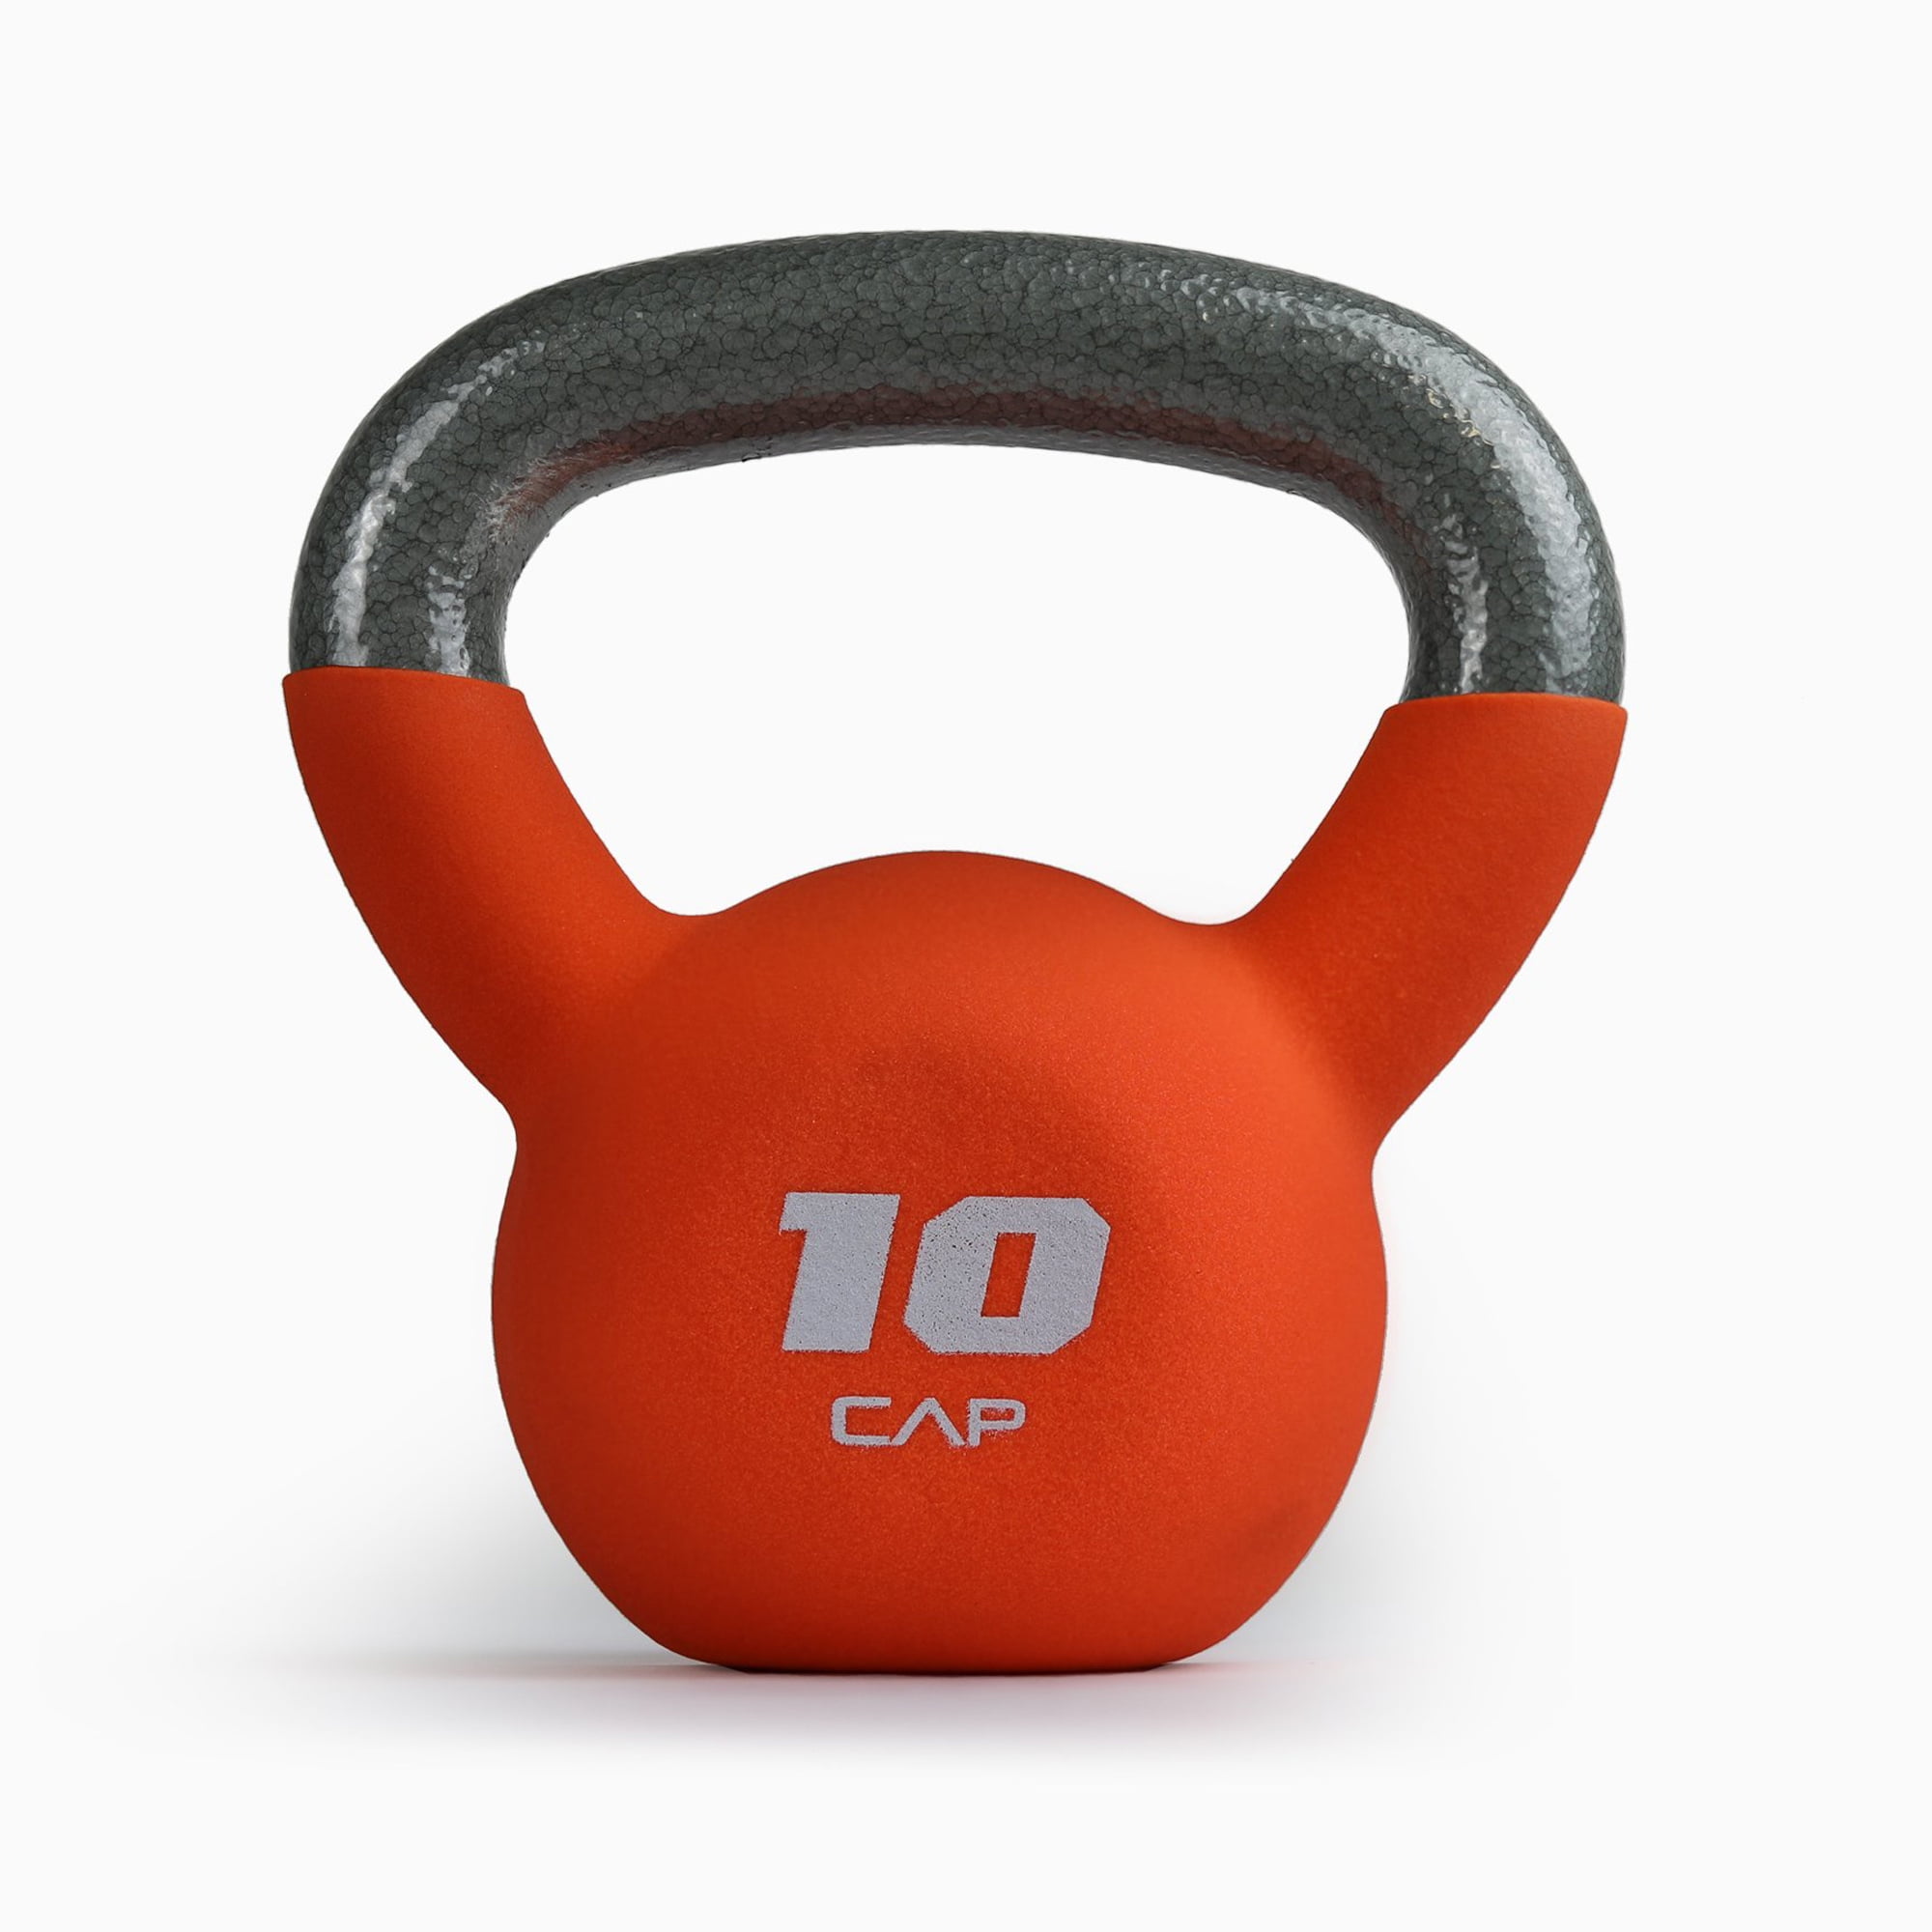 New 35 LB Cap Rubber Coated Kettlebell Same Day Shipping Kettle Bell 